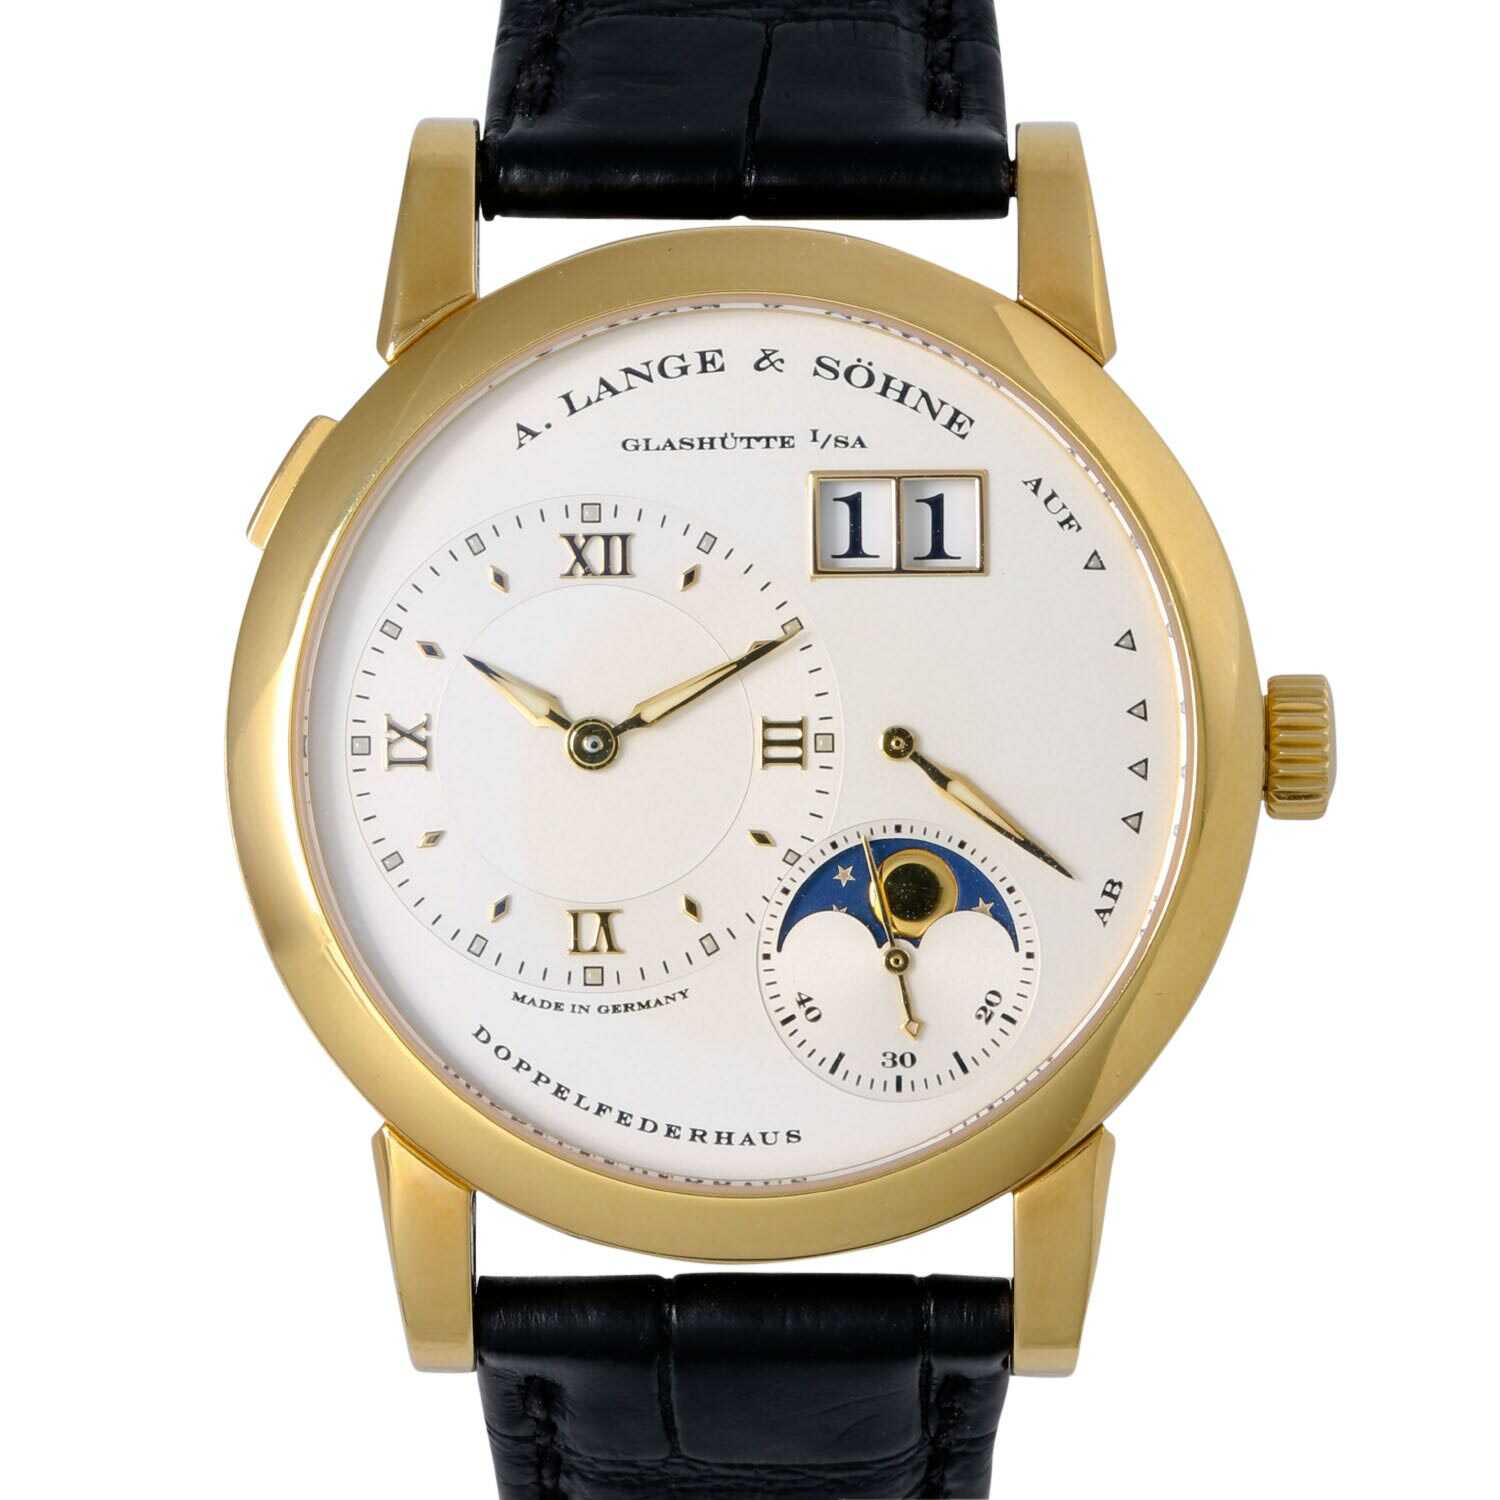 A. LANGE & SÖHNE Lange 1 "Moon Phase", ref. 109.021. men's wristwatch from 2009.